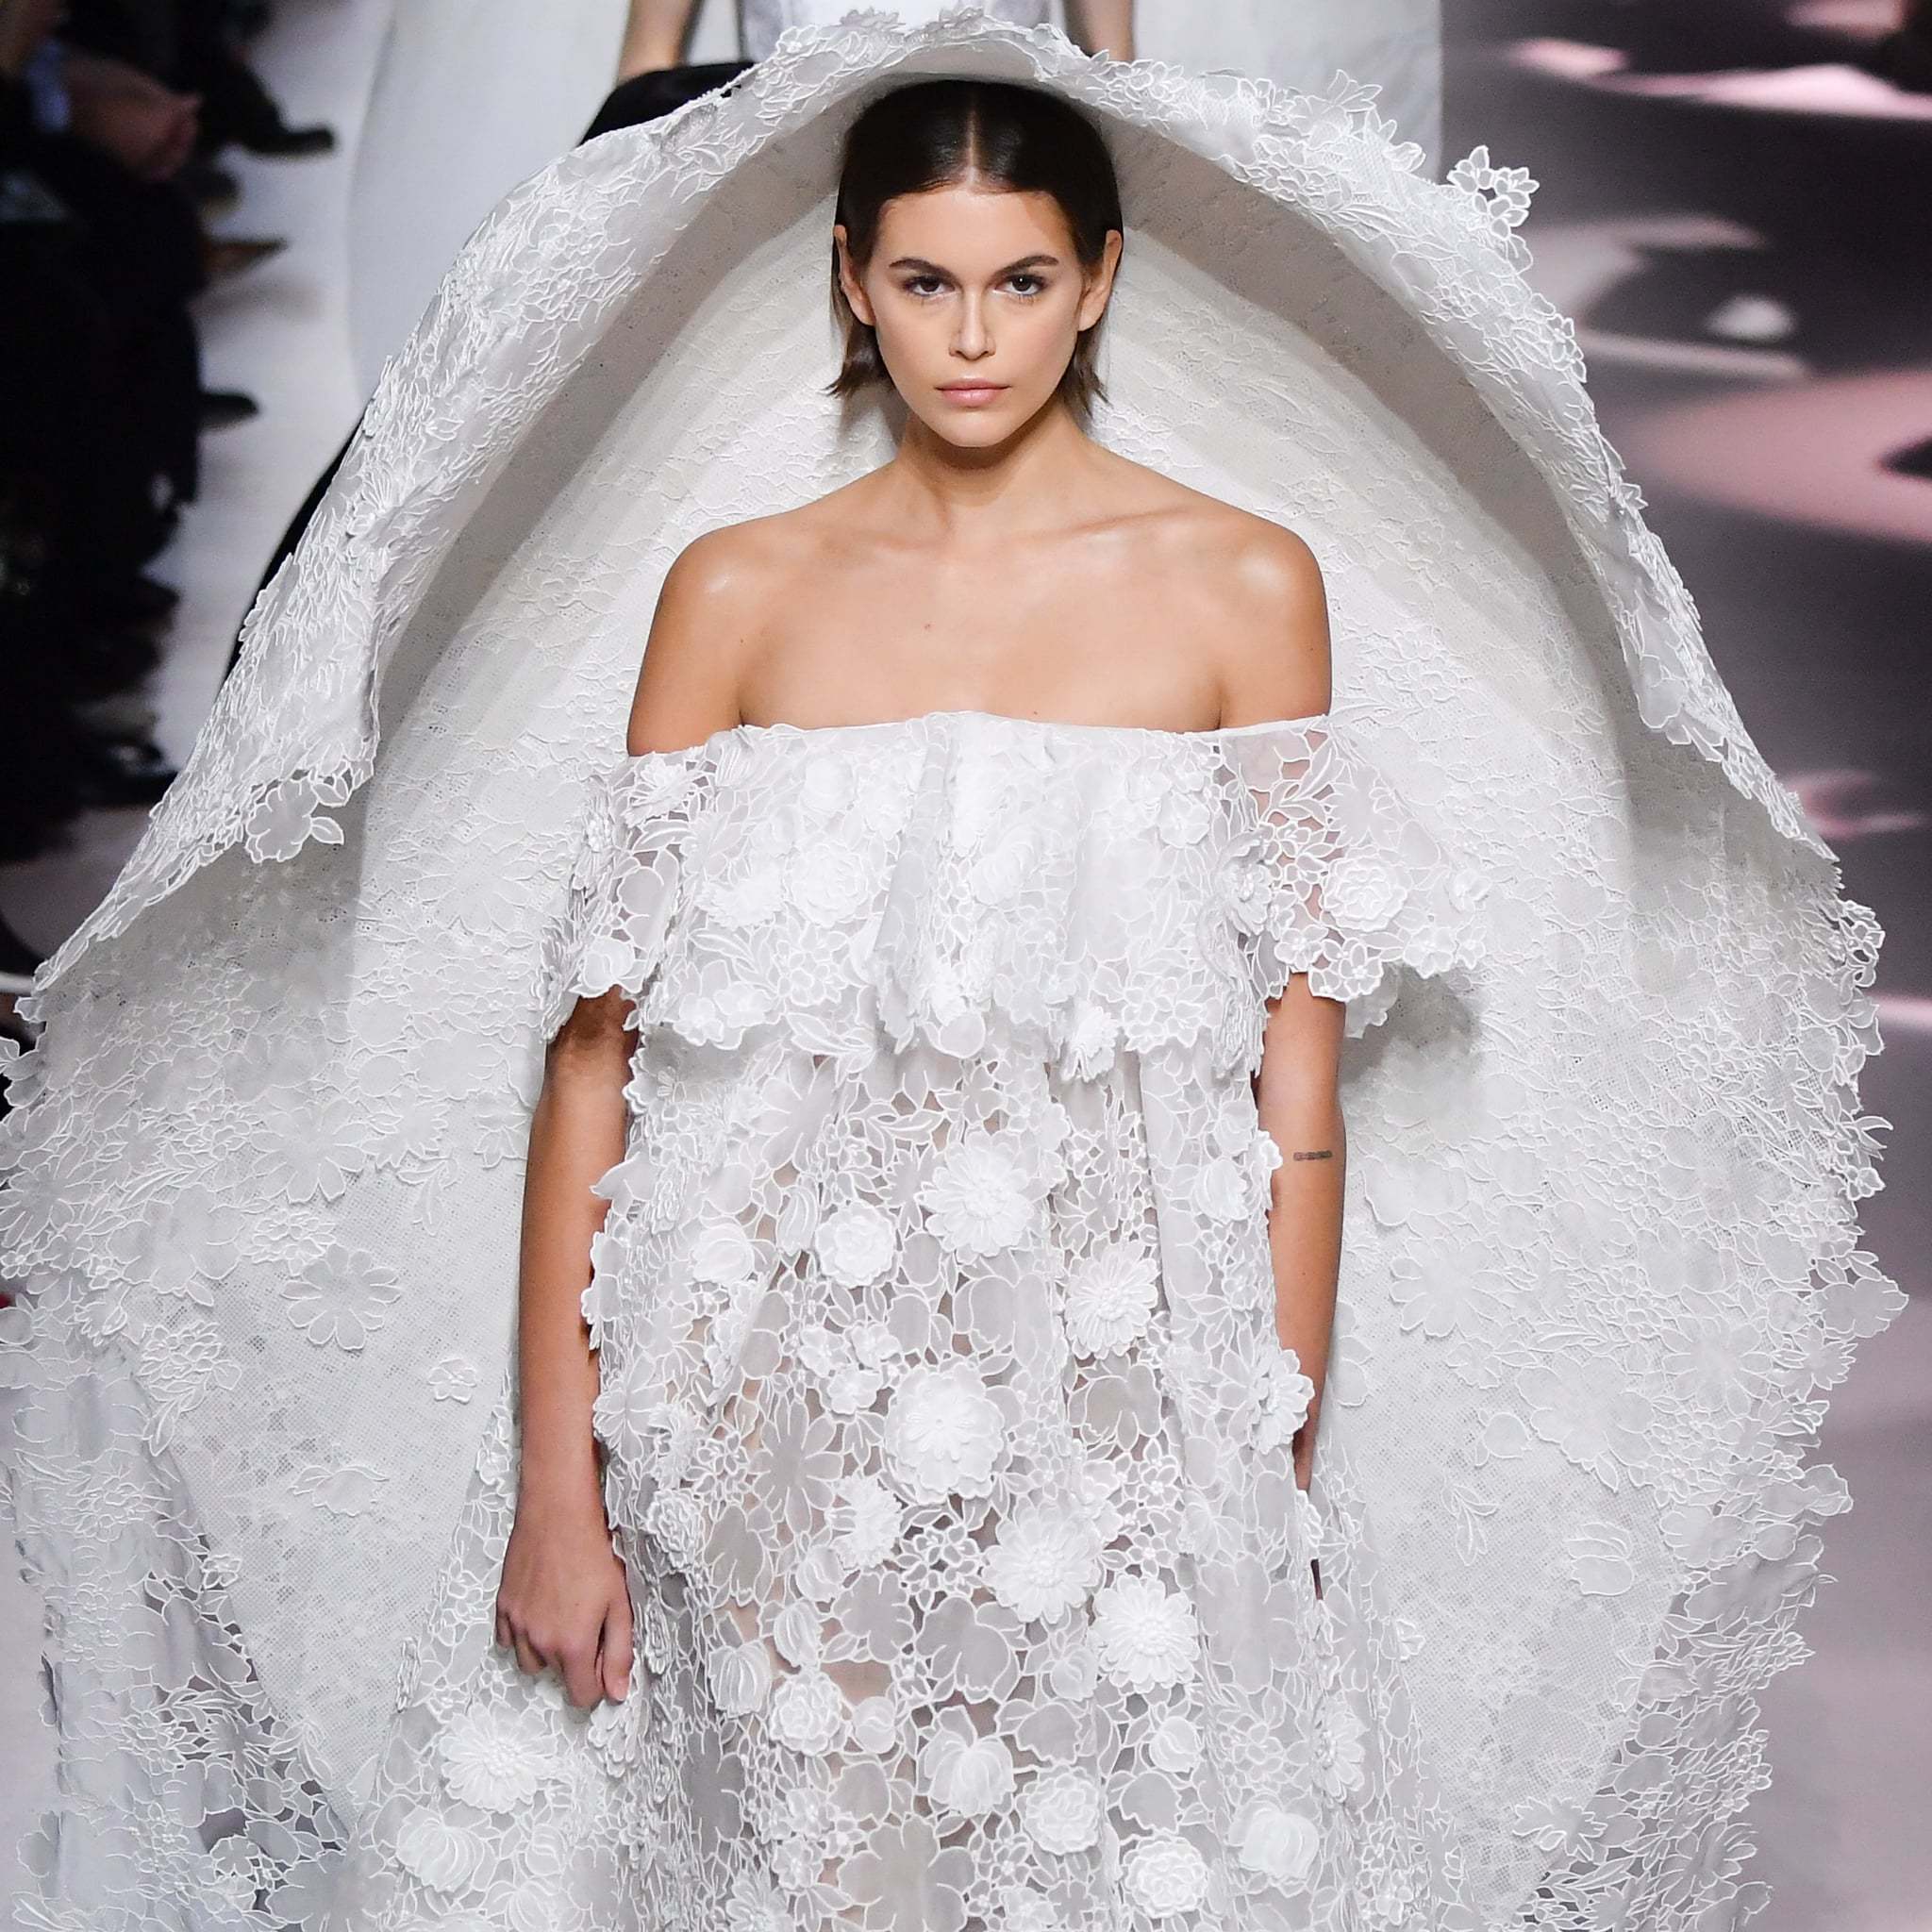 givenchy bridal gowns